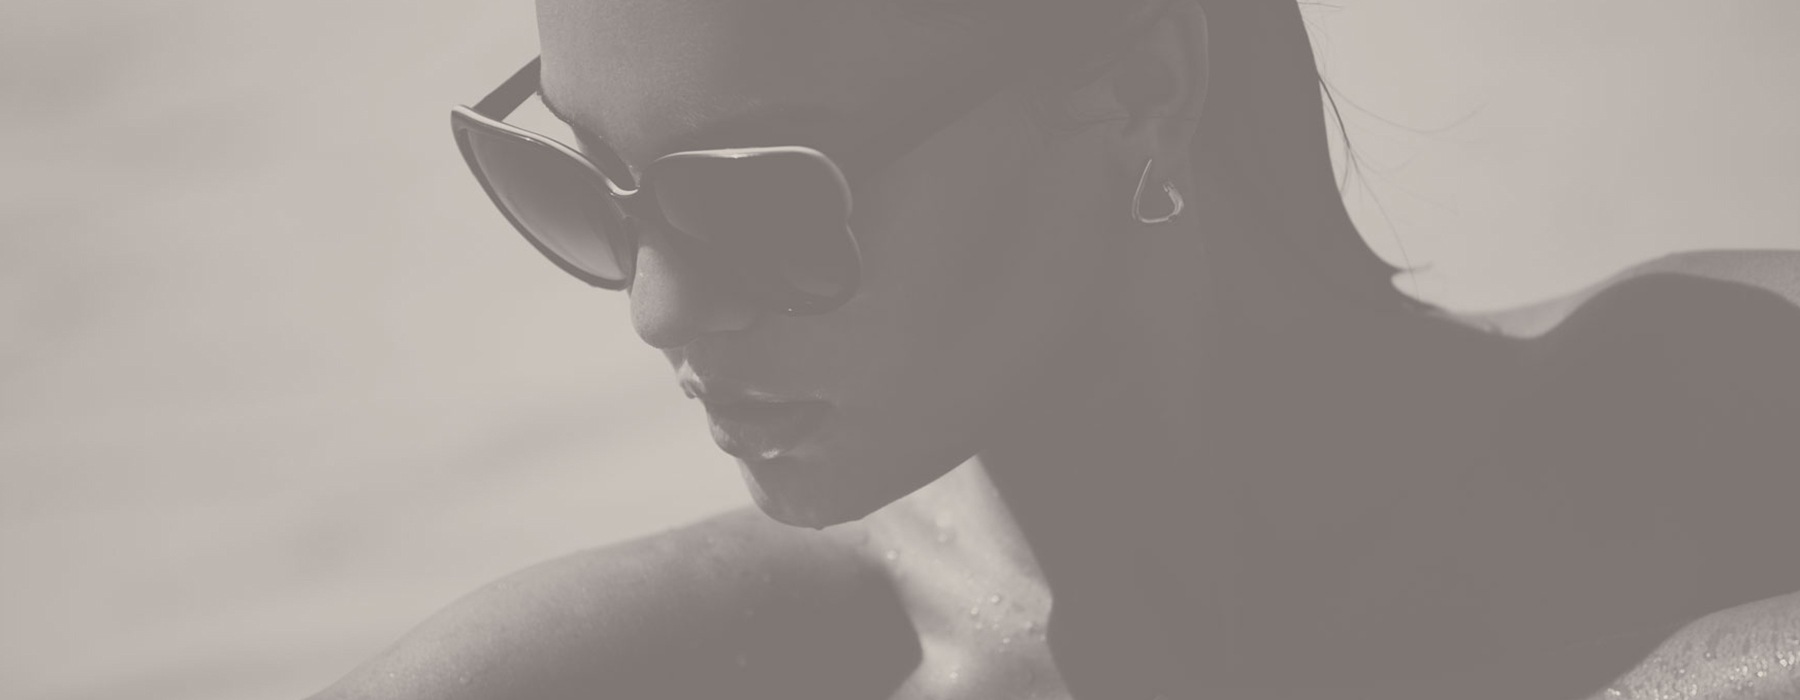 lifestyle image of a young woman looking down in sunglasses from within a pool